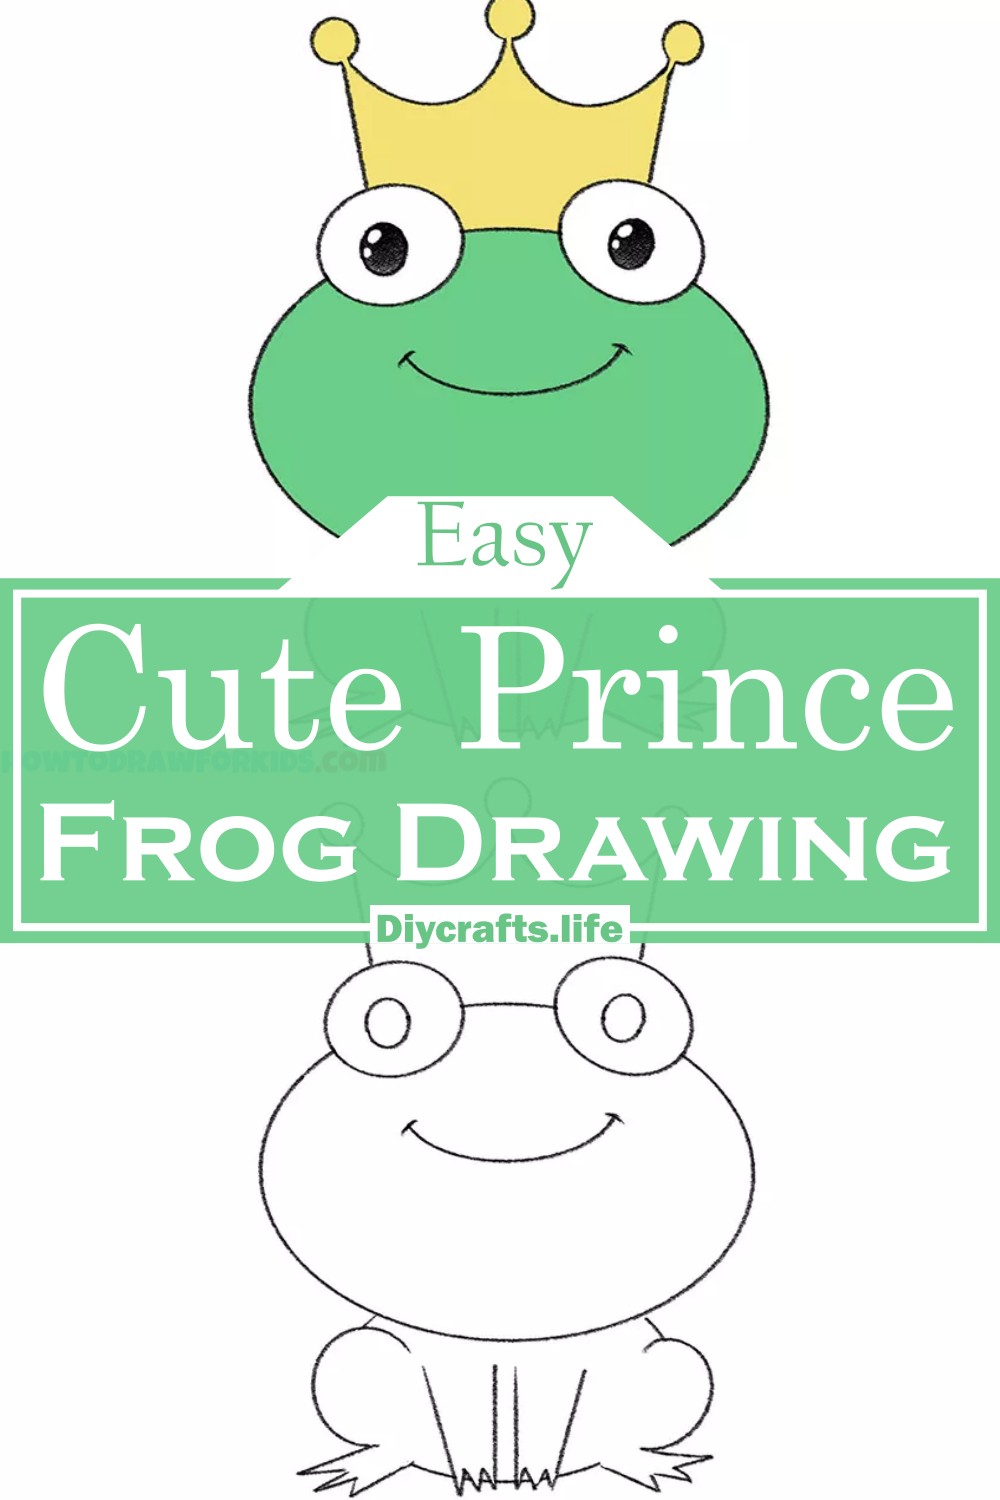 How to Draw a Frog in 12 Easy Steps - VerbNow-saigonsouth.com.vn